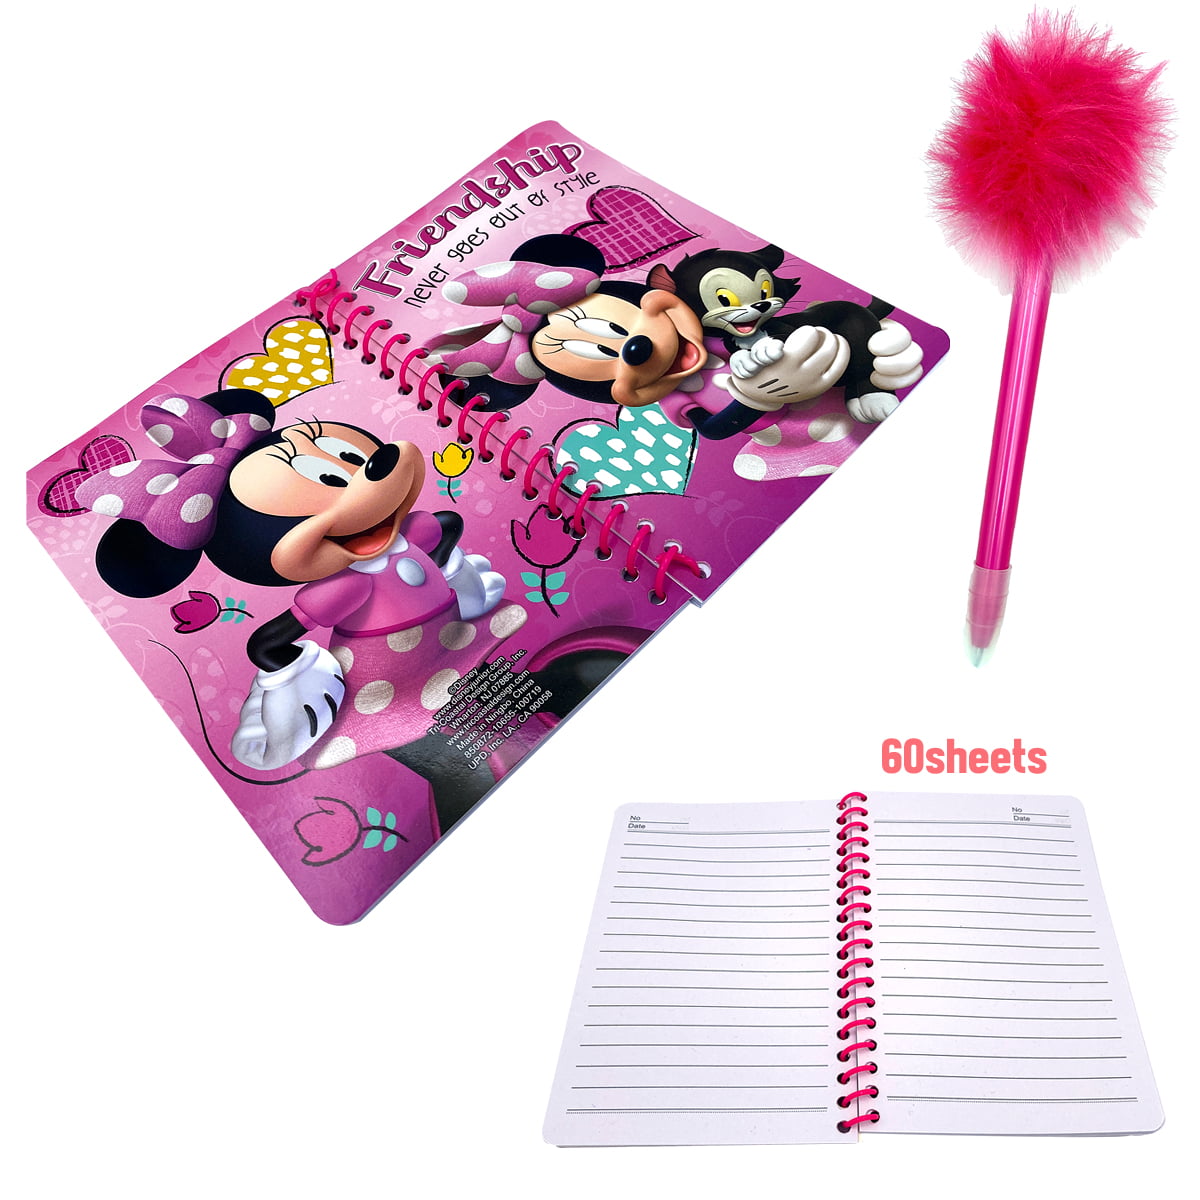 1 DISNEY 40 Page Die Cut Spiral Notebook With Pen Set Assorted Disney Theme Girl 